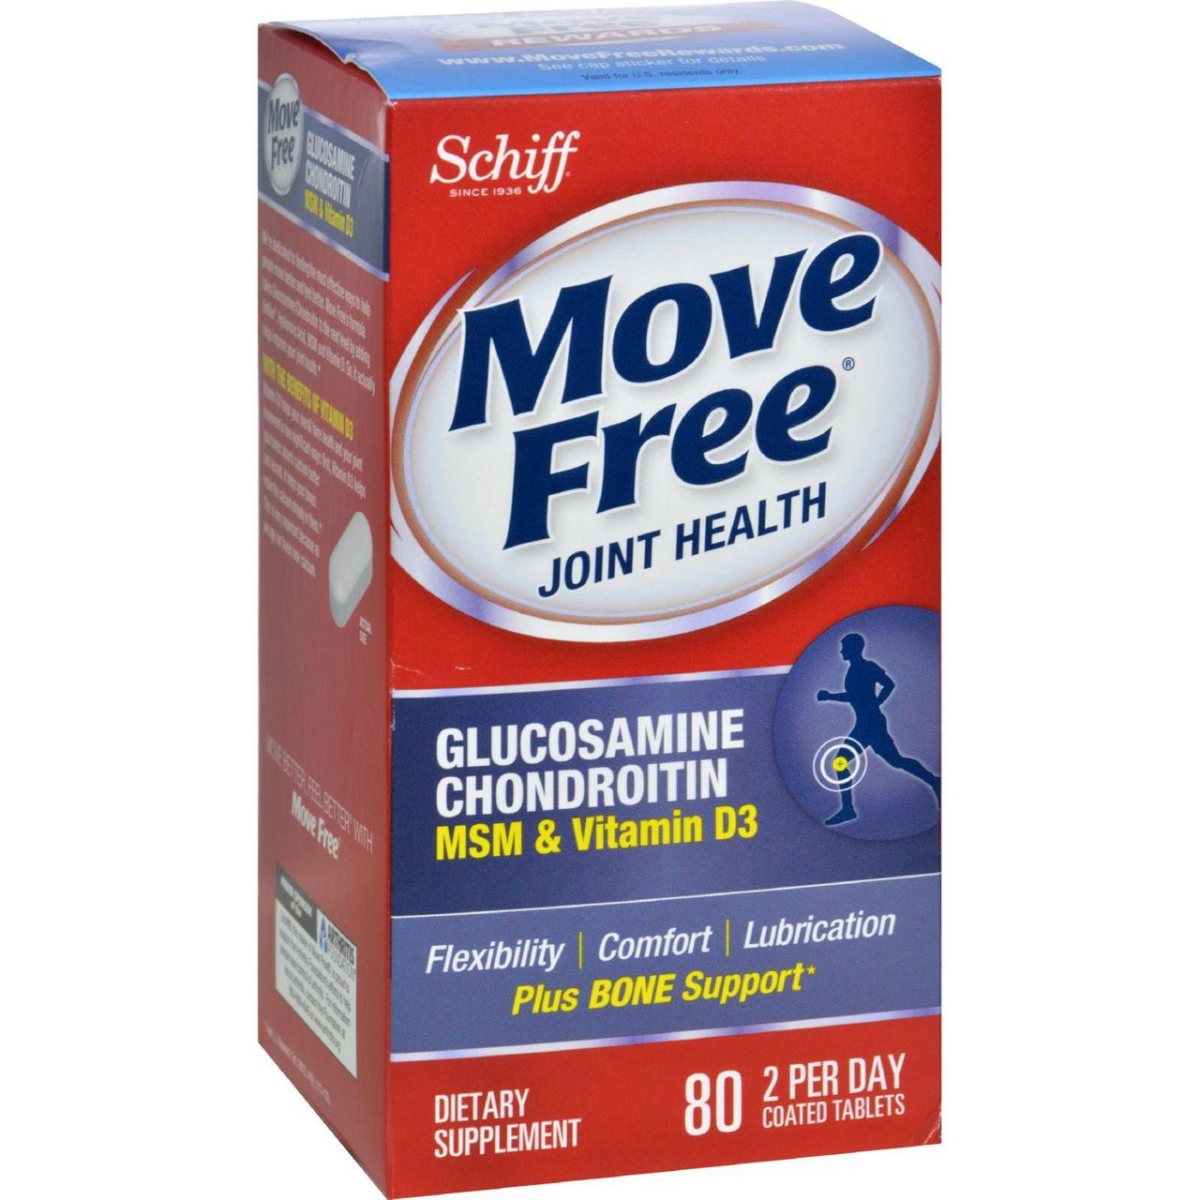 Hg0144816 Move Free Advanced Triple Strength Plus Msm & Vitamin D3 - 80 Coated Tablets